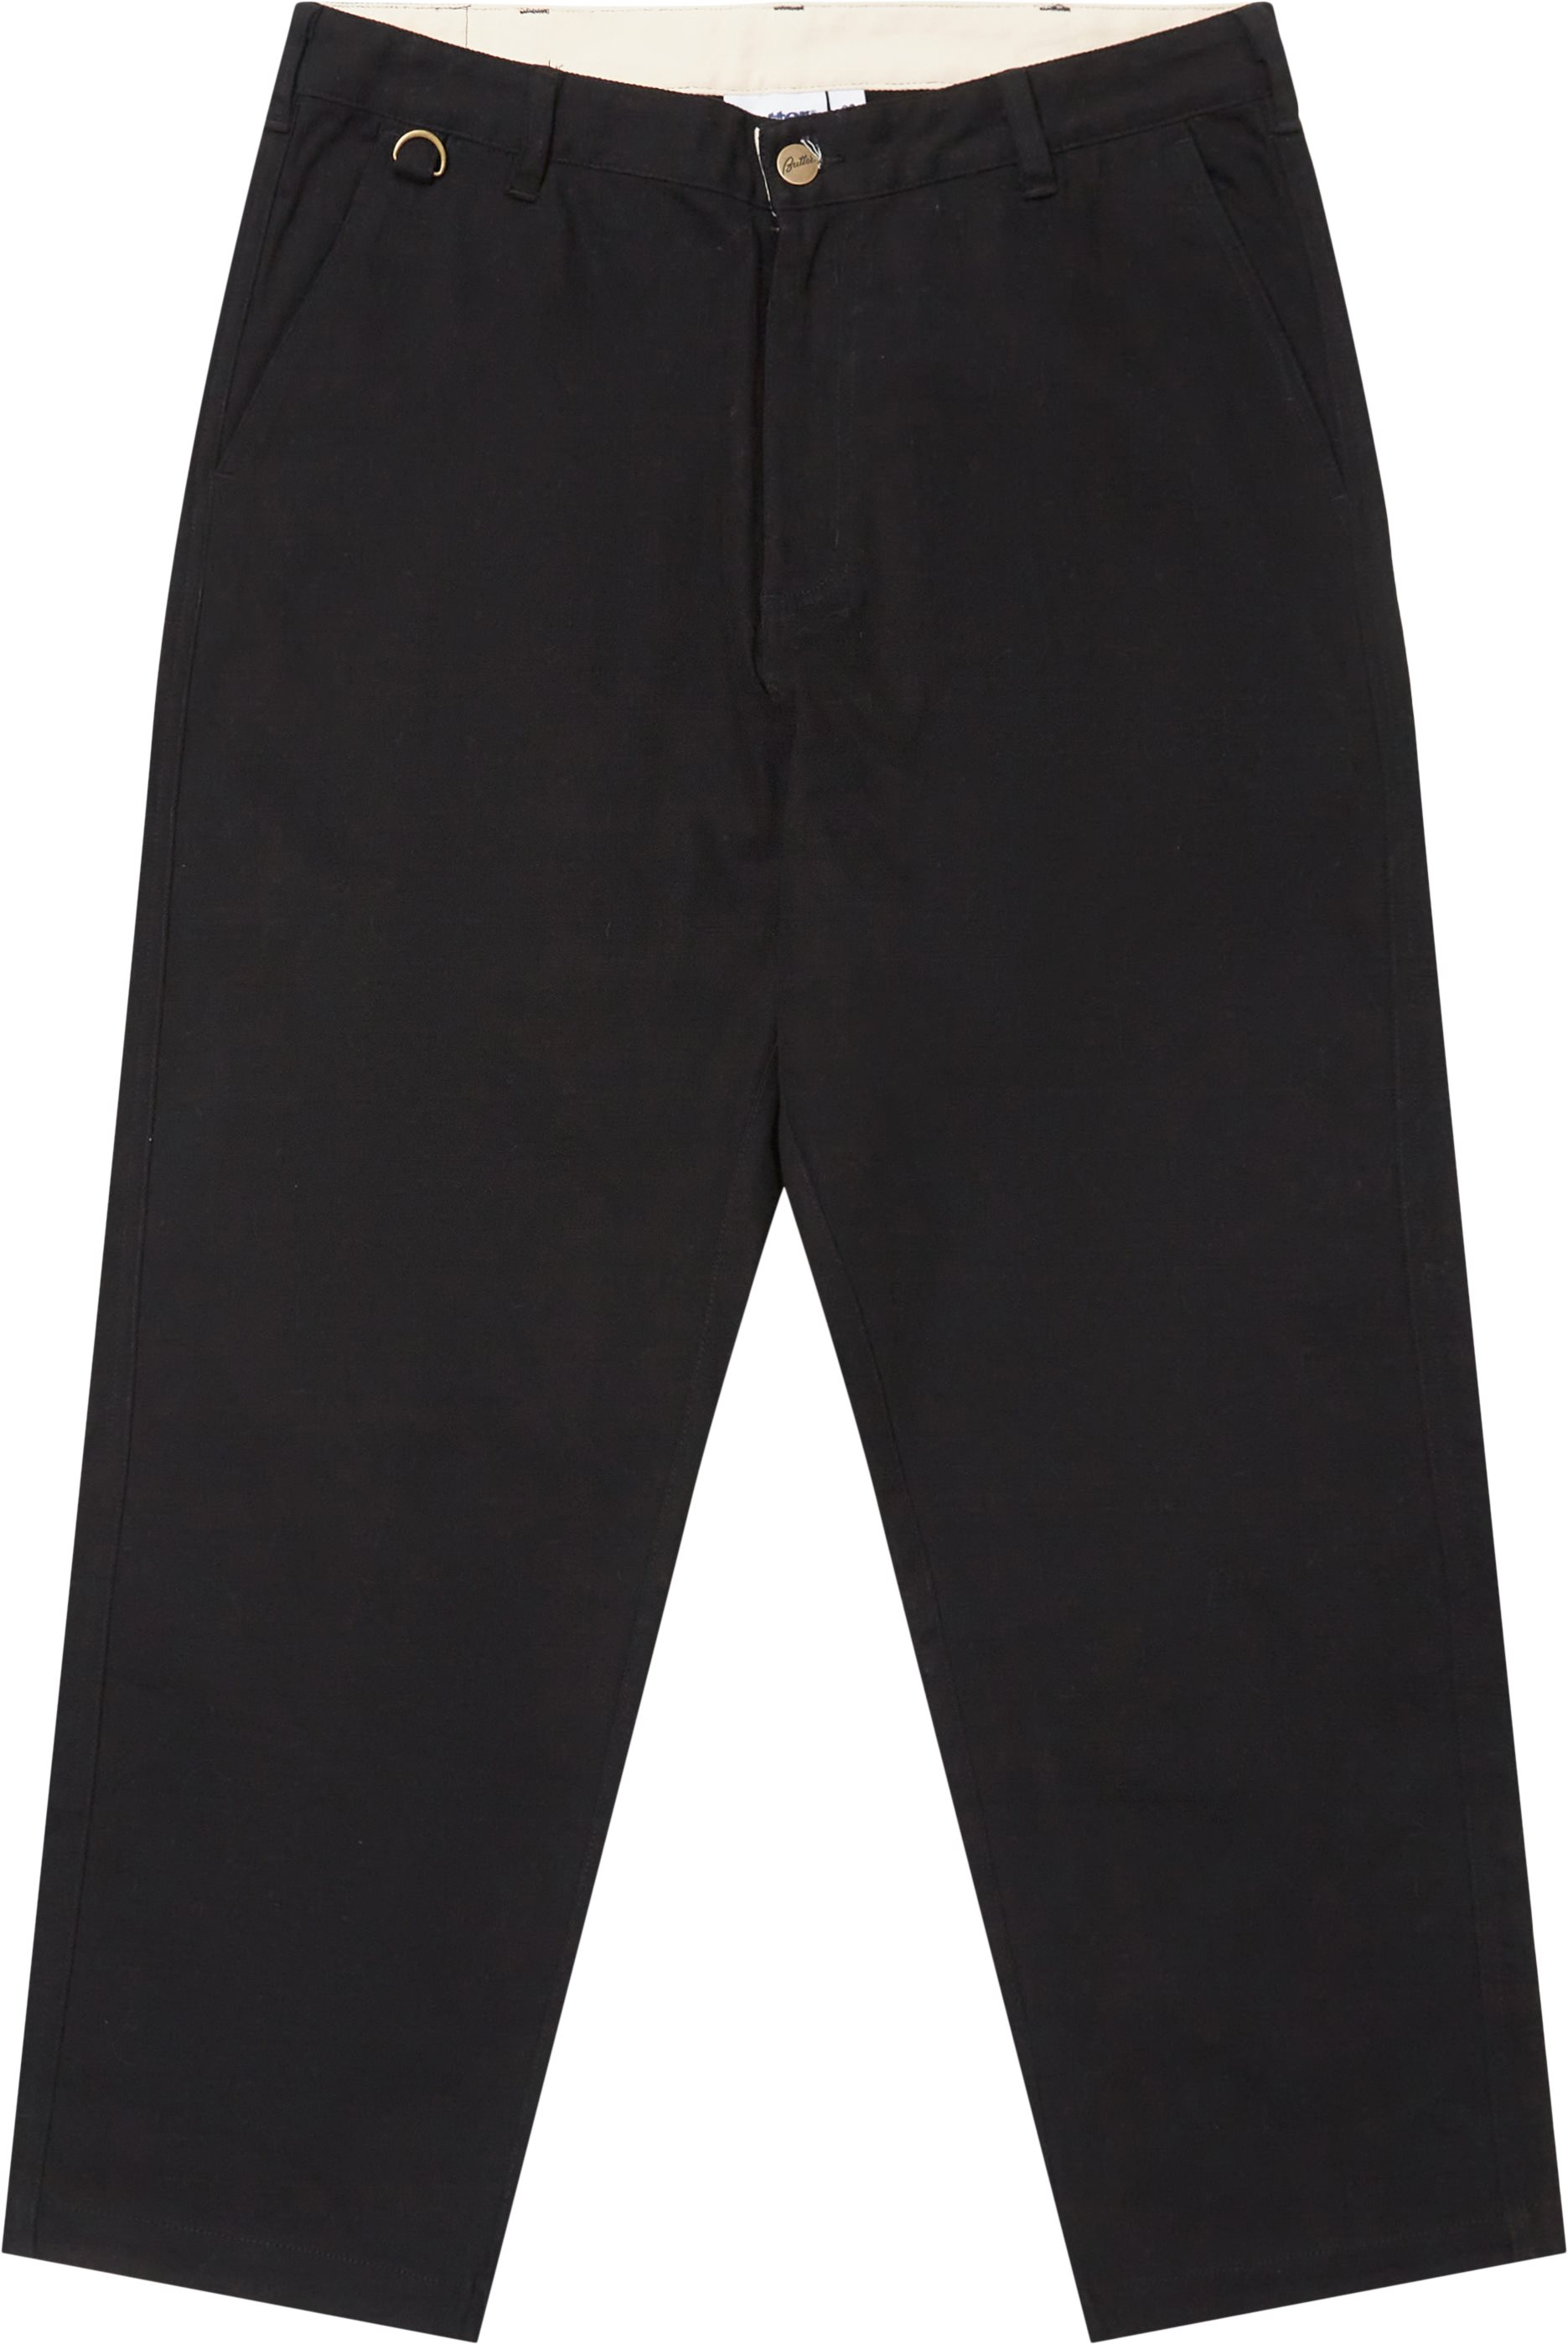 Marshall Pants - Trousers - Loose fit - Black